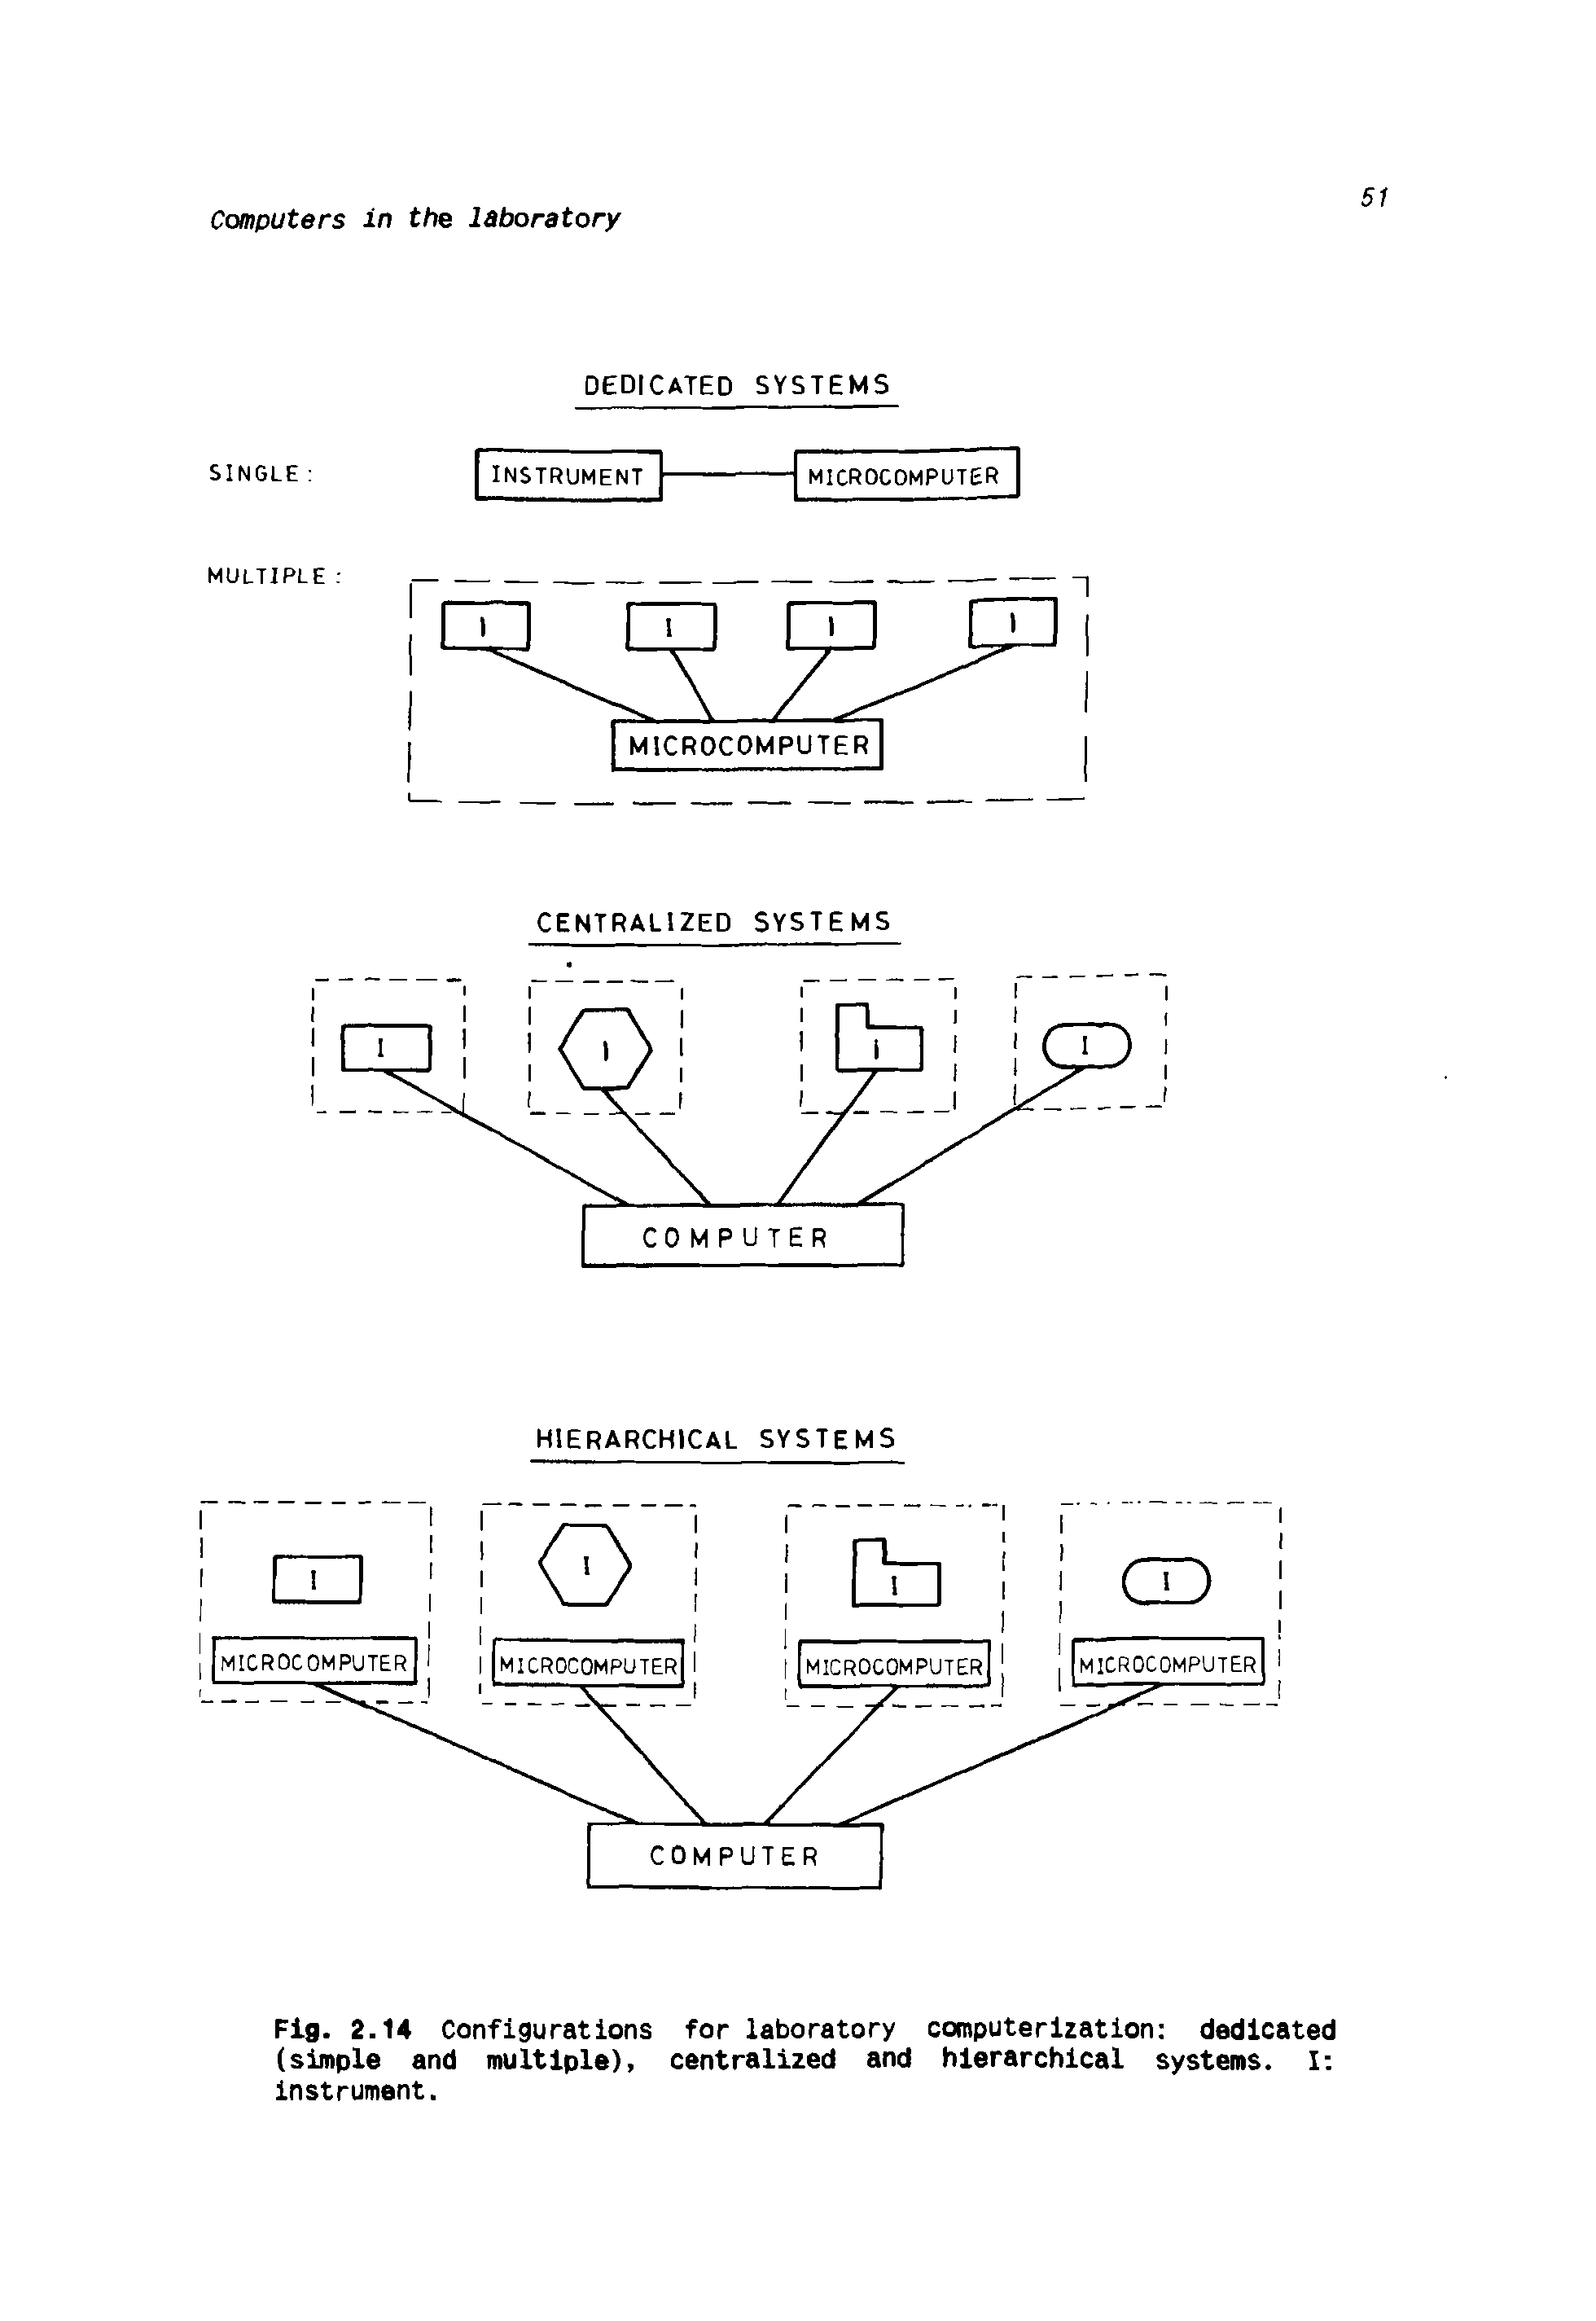 Fig. 2.14 Configurations for laboratory computerization dedicated (simple and multiple), centralized and hierarchical systems. I instrument.